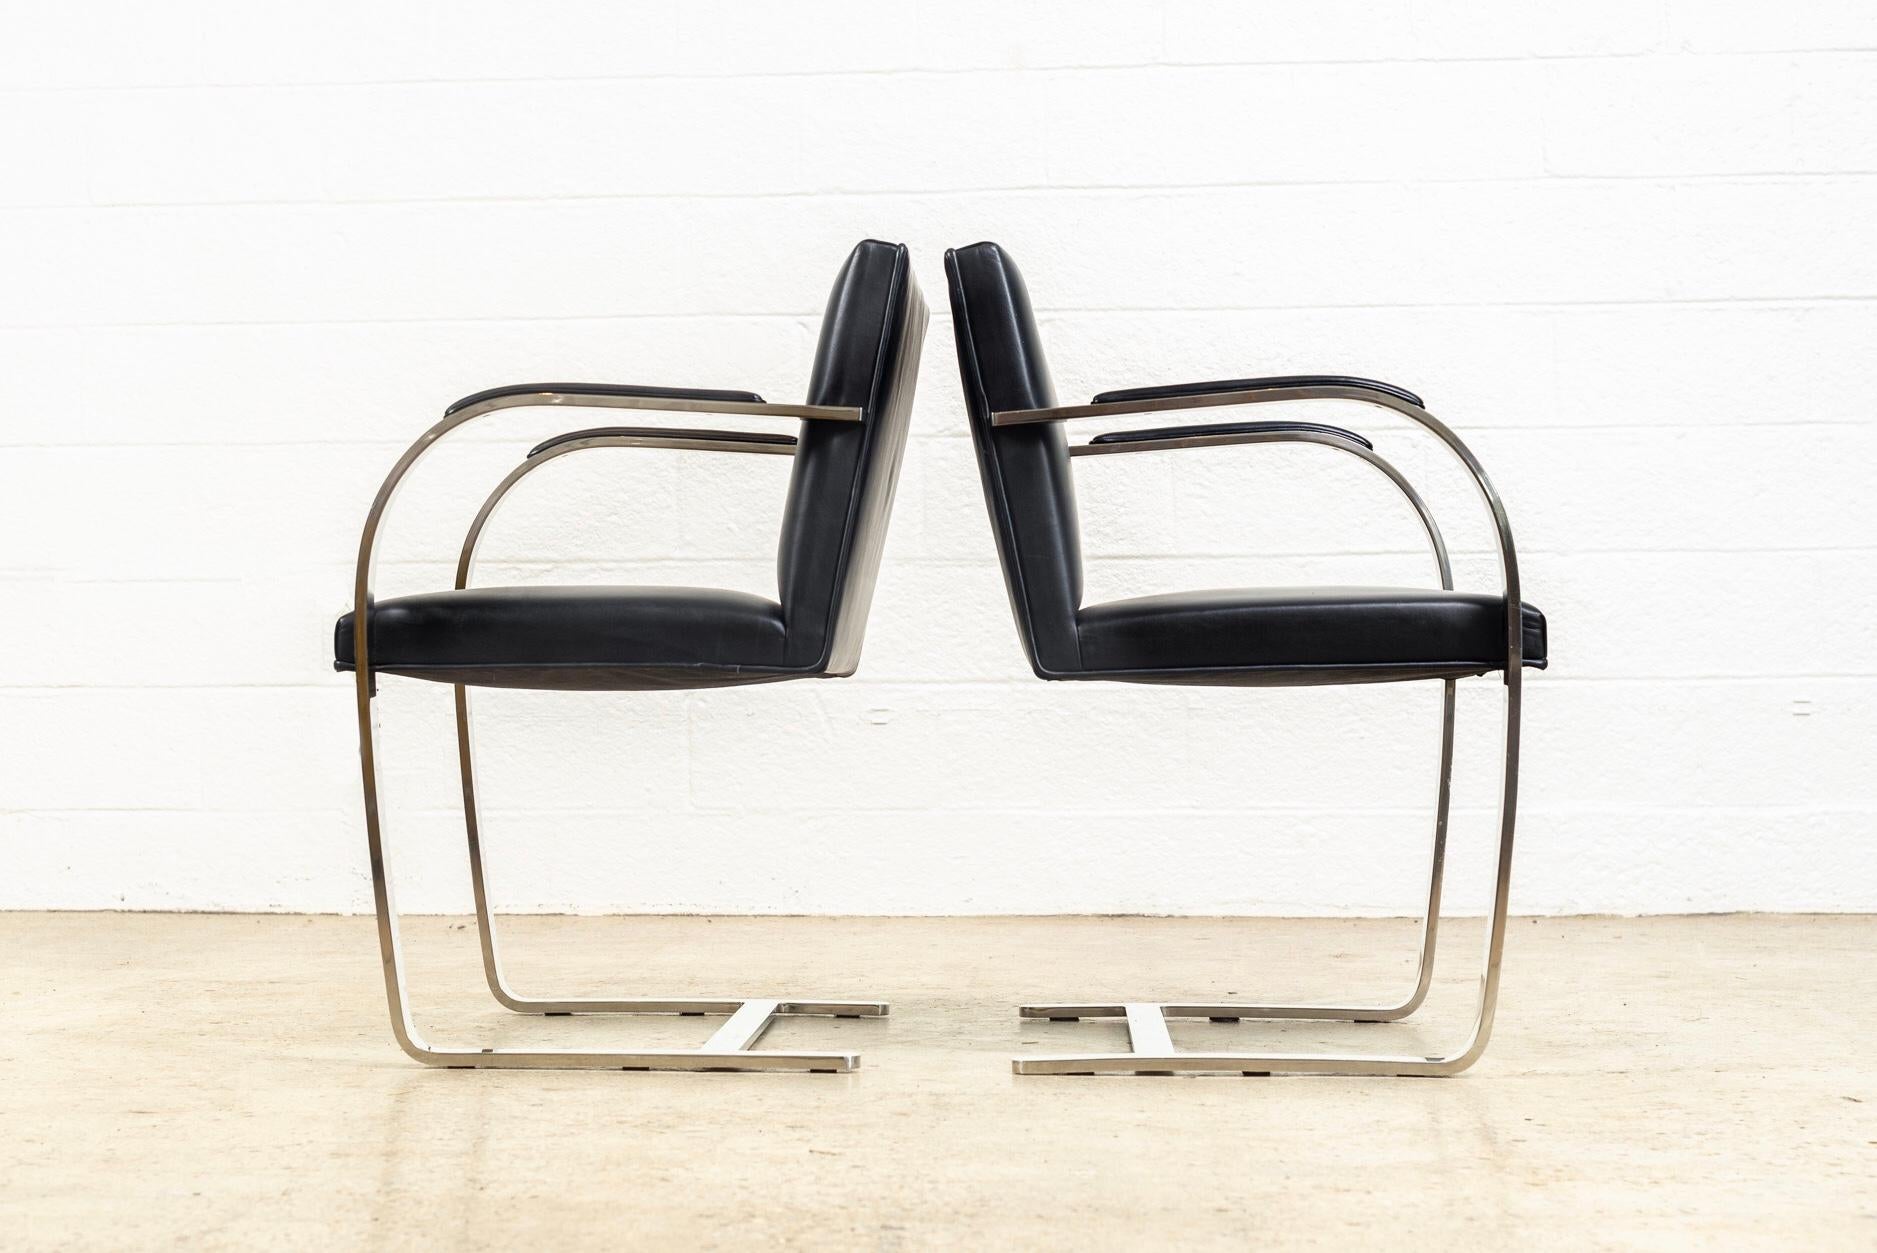 Late 20th Century Mies van der Rohe Knoll Brno Flat Bar Black Leather & Chrome Chairs, Set of 4 For Sale